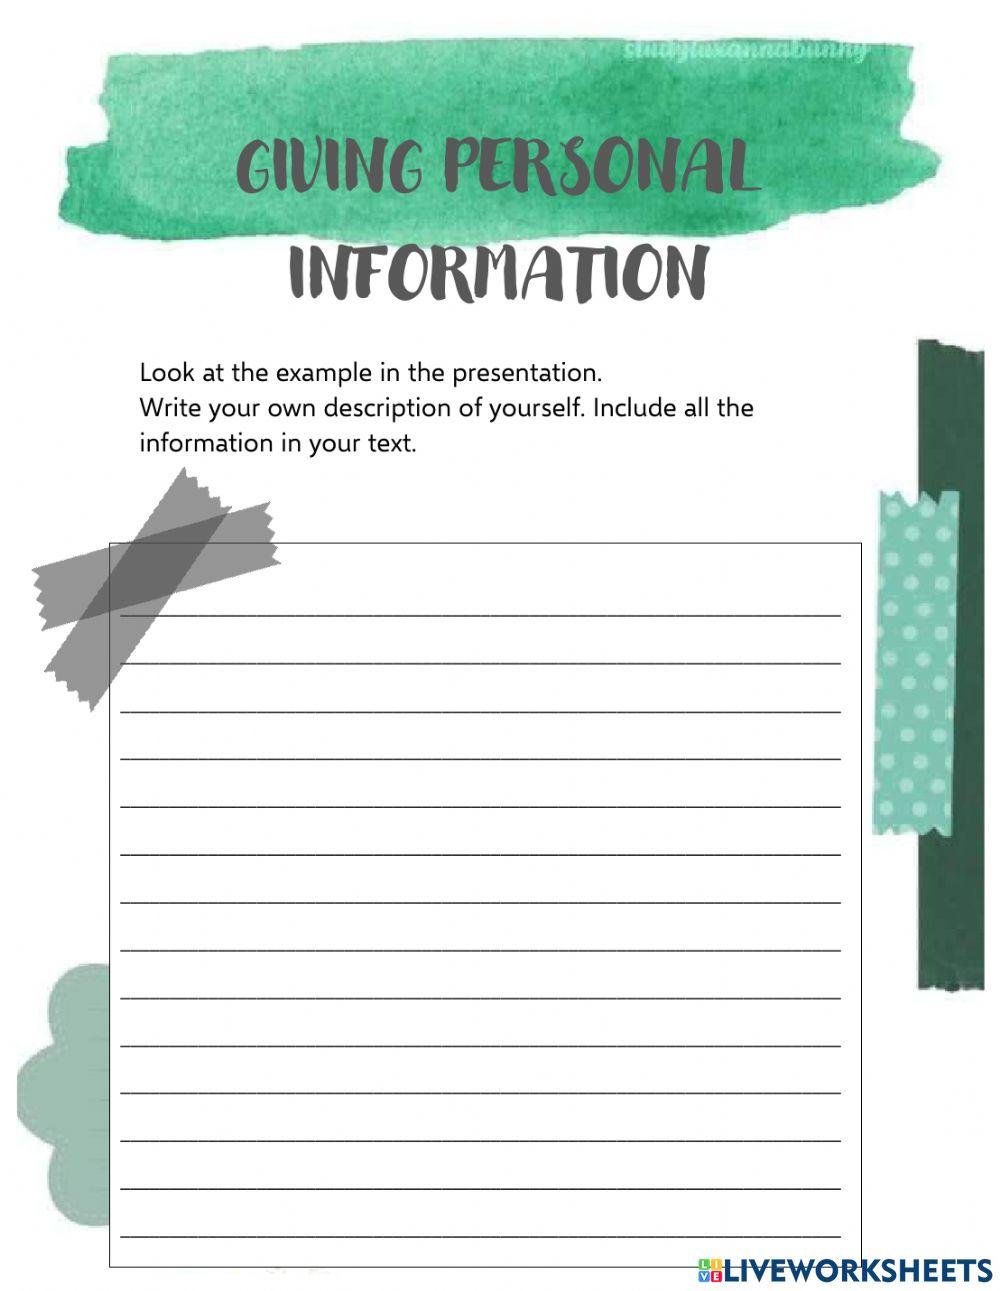 Giving personal information - writing